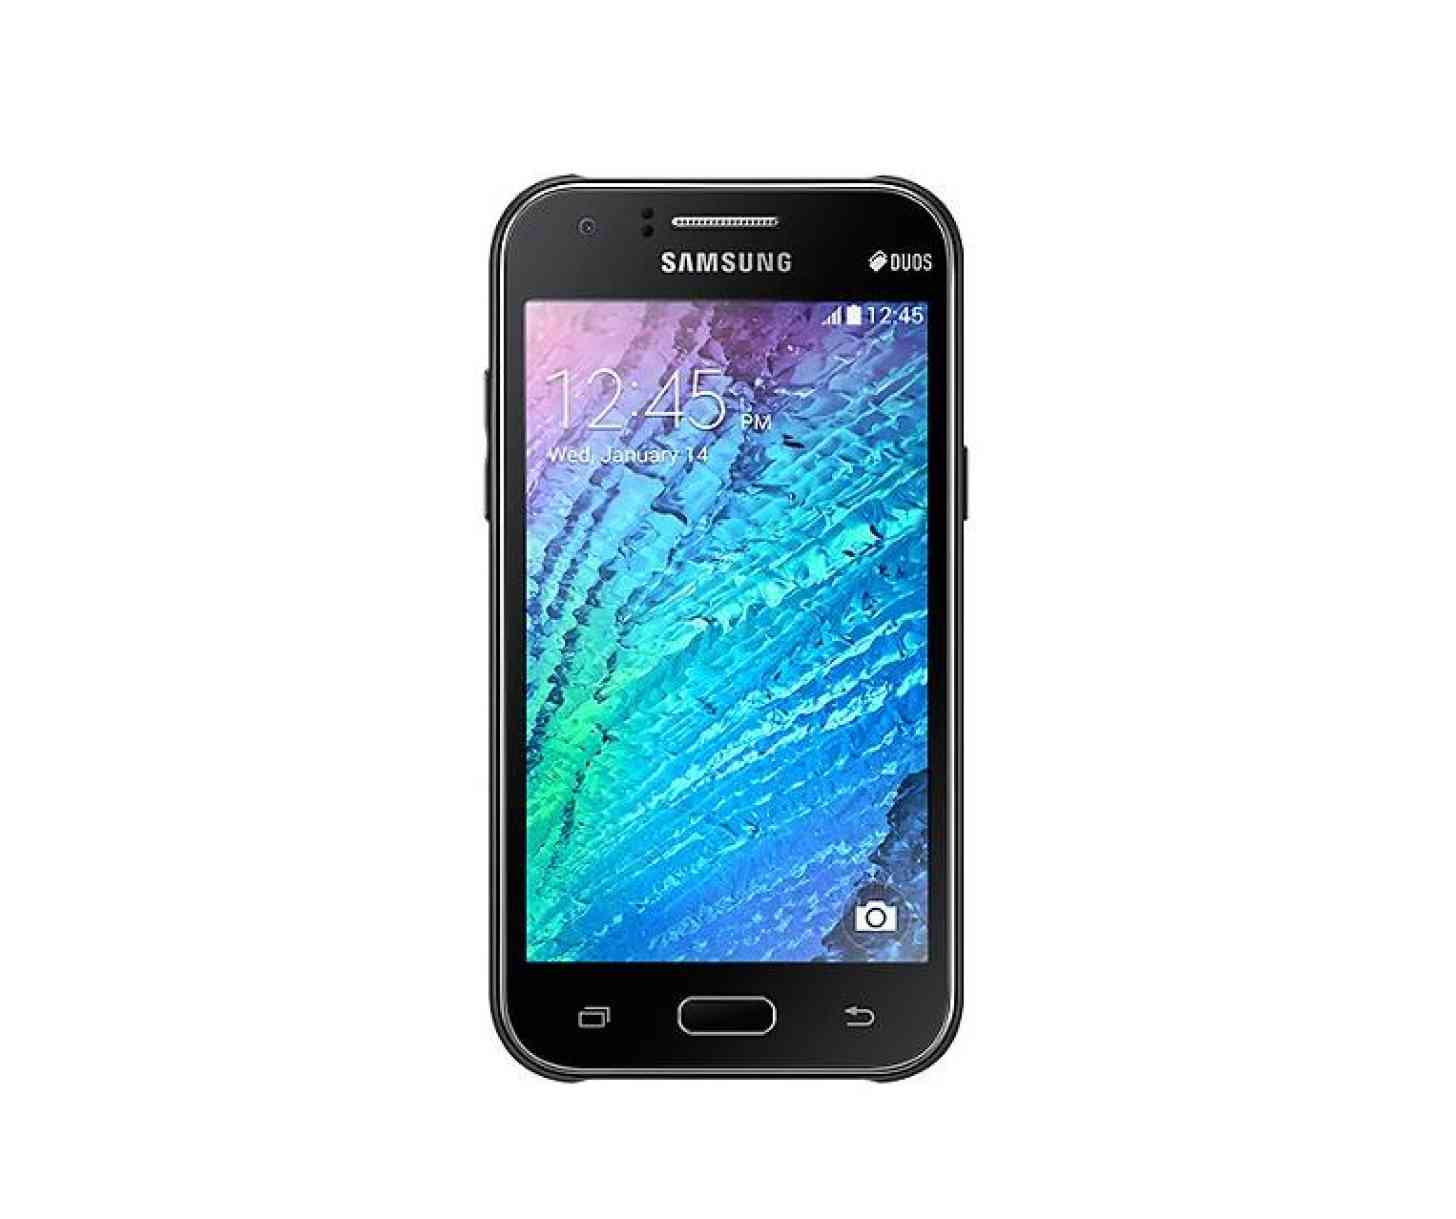 Samsung’s Galaxy J1 will hit the Canadian mobile market this coming April 7